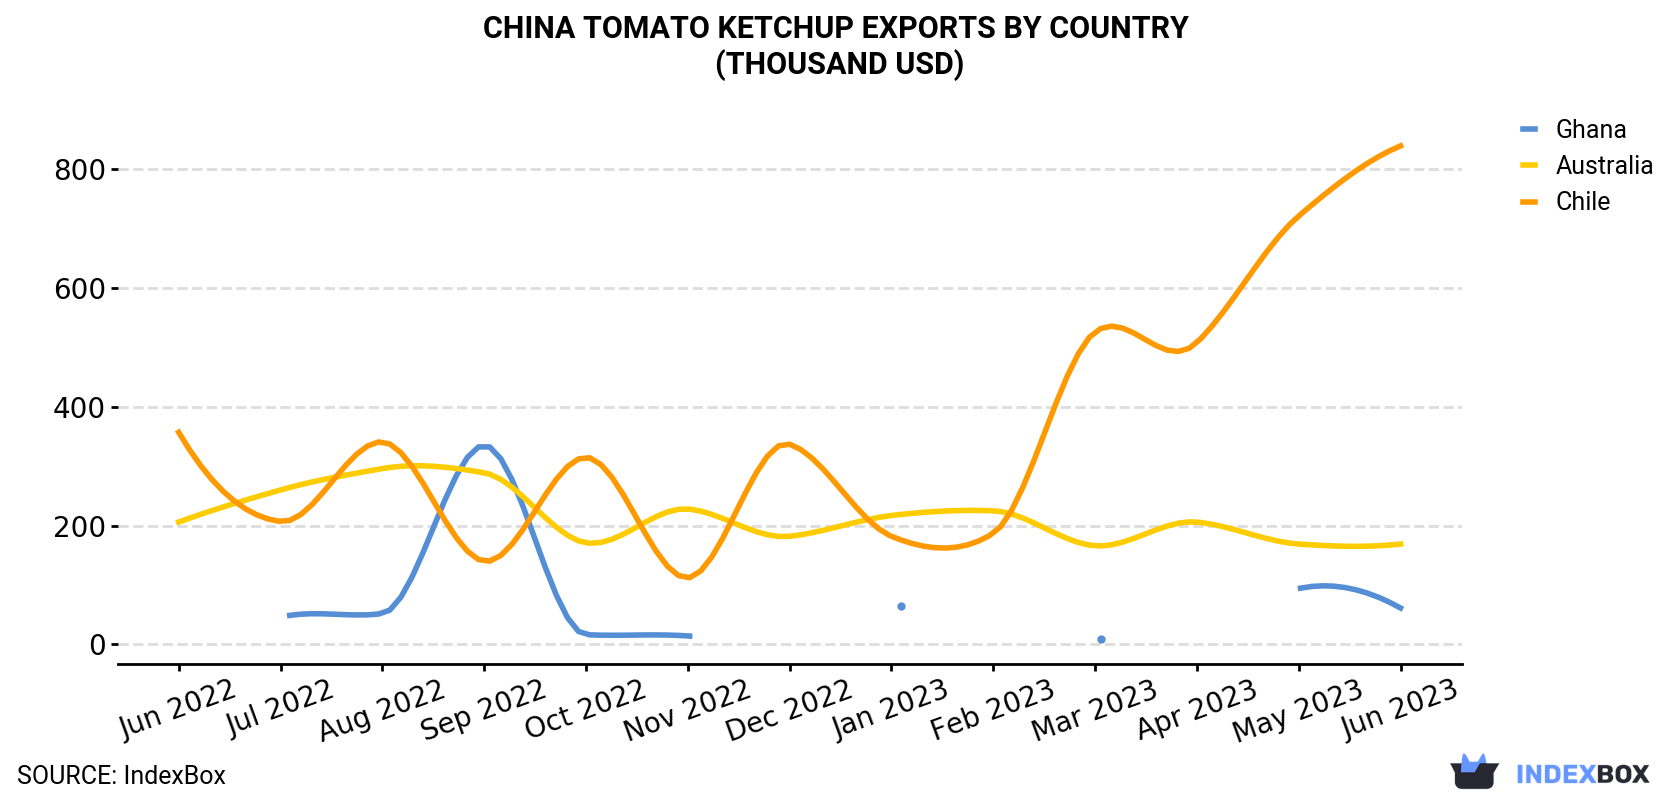 China Tomato Ketchup Exports By Country (Thousand USD)